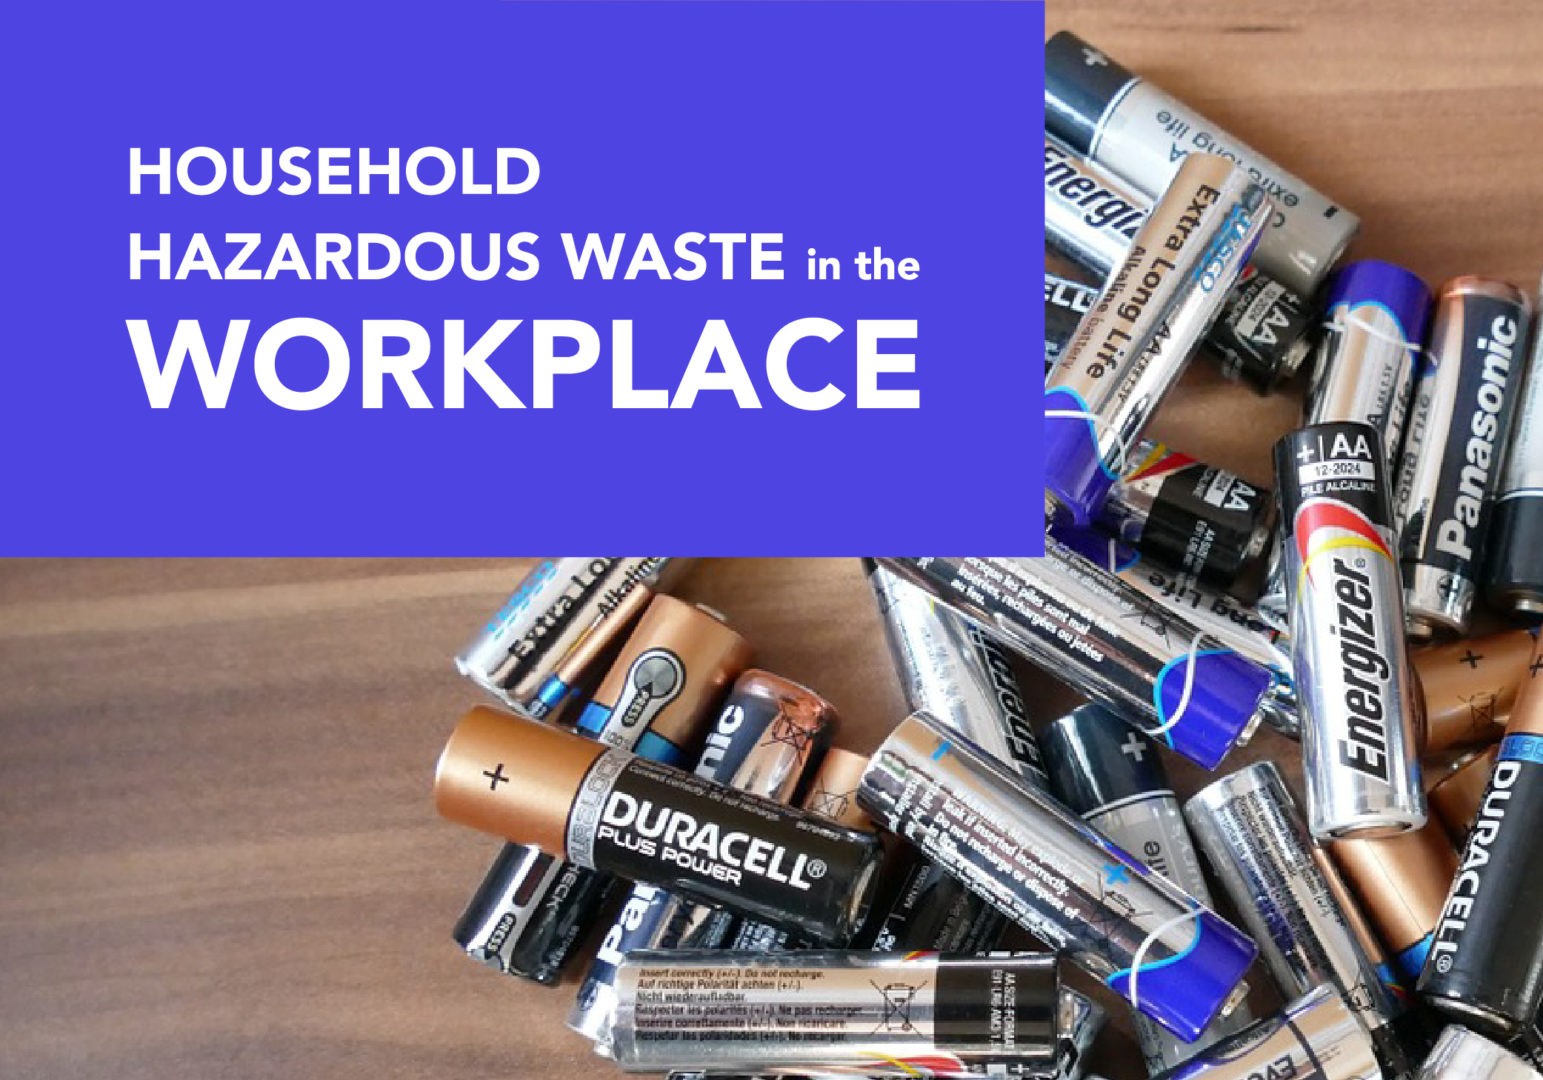 Household Hazardous Waste in the Workplace